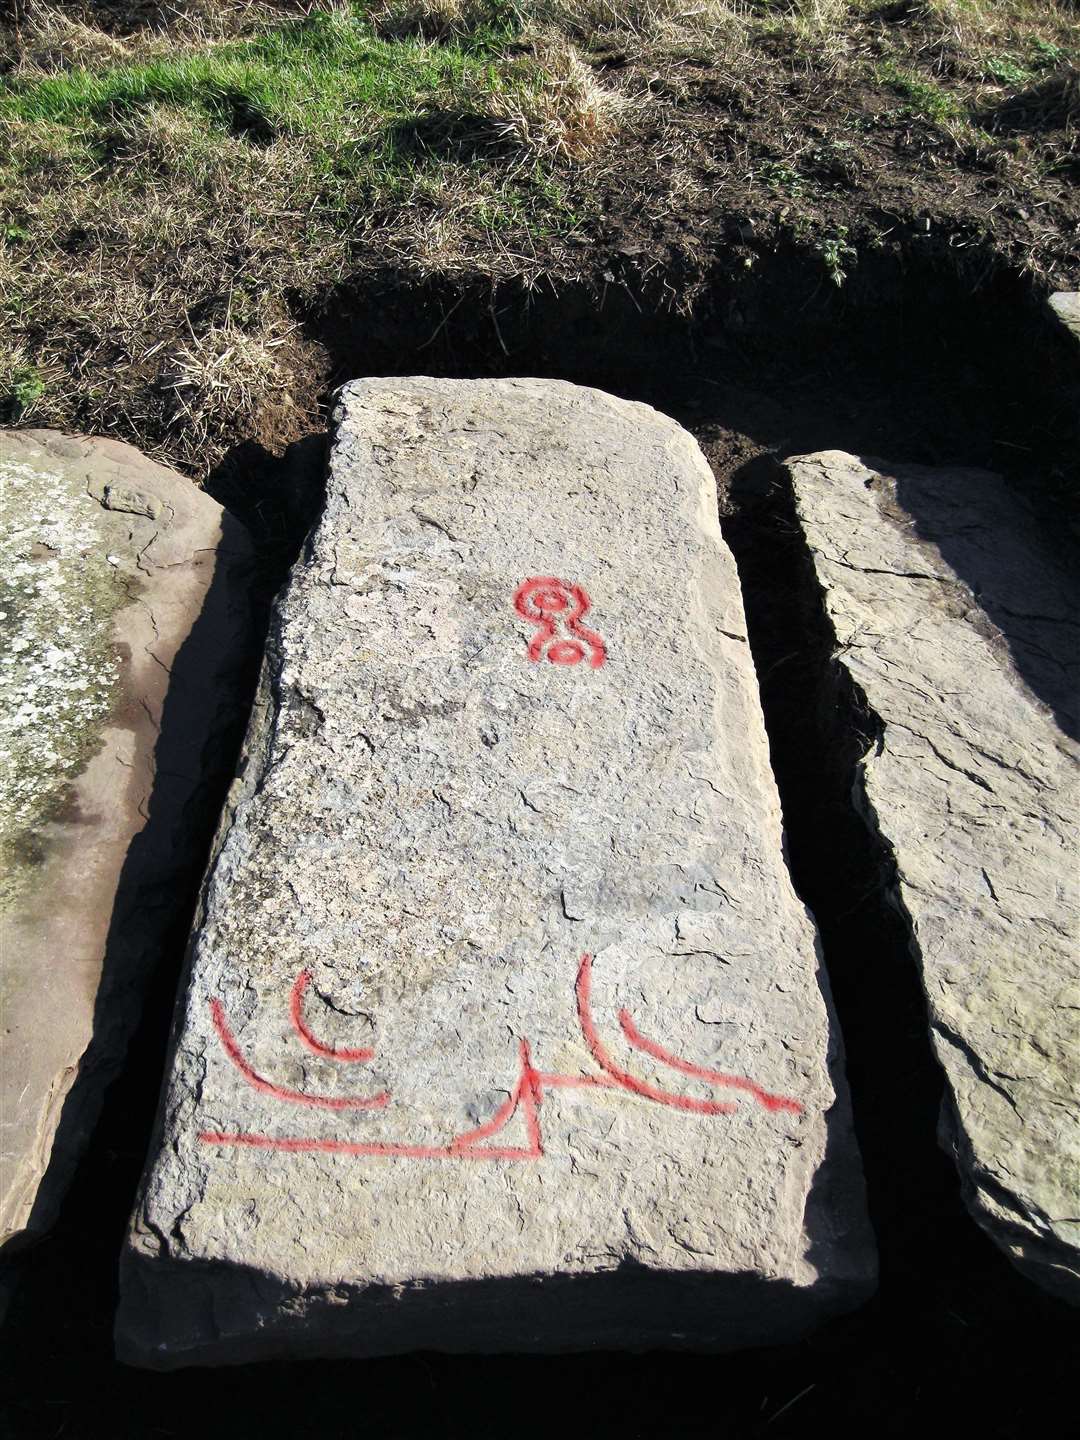 A photograph of the Pictish stone in situ at the Ulbster graveyard in 2022. The slab's markings are highlighted in red. Some of the lines are covered with lichens and will hopefully be clearer after restoration work is carried out. The area near the bottom appears to show a double disc and Z-rod often seen in inscribed Pictish stones.